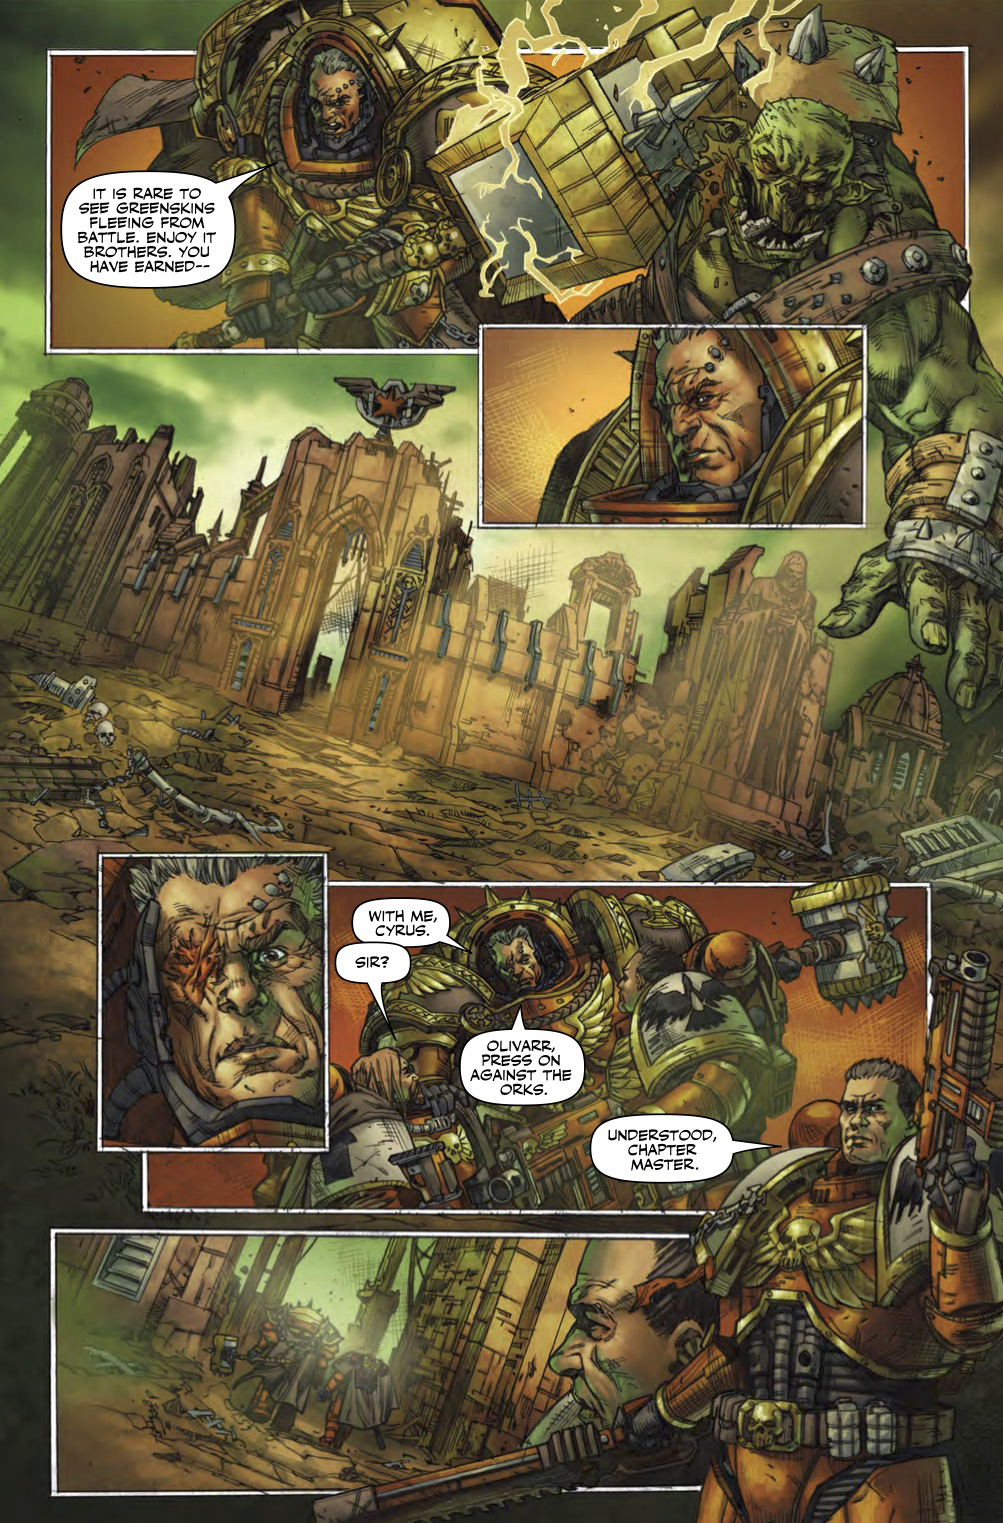 Space-War Is Space-Hell In The New Warhammer 40K: Dawn Of War Comic